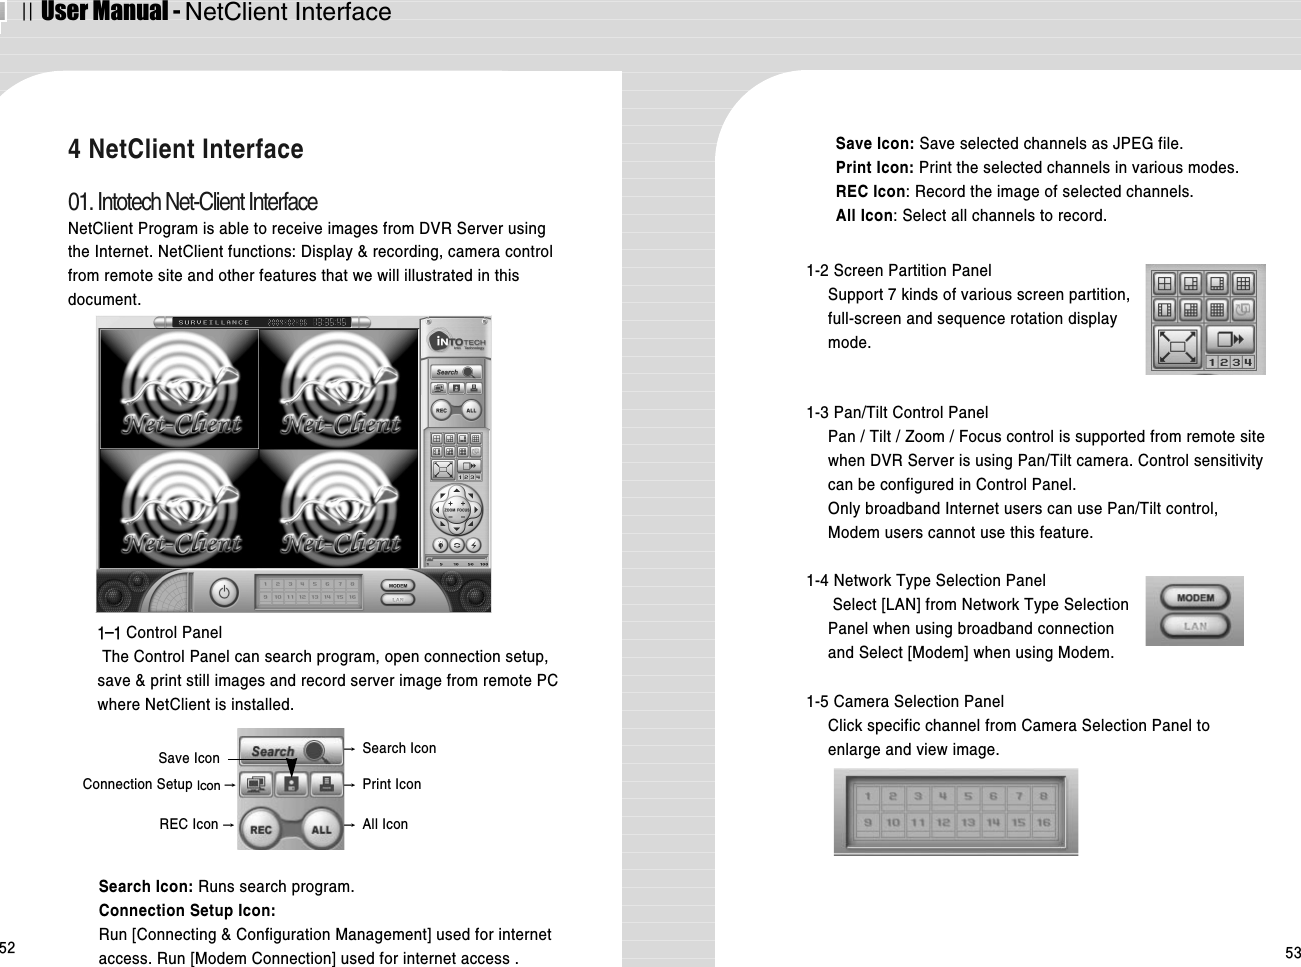 ⅡUser Manual - NetClient Interface52 534 NetClient Interface01. Intotech Net-Client InterfaceNetClient Program is able to receive images from DVR Server usingthe Internet. NetClient functions: Display &amp; recording, camera controlfrom remote site and other features that we will illustrated in thisdocument.1-1 Control PanelThe Control Panel can search program, open connection setup,save &amp; print still images and record server image from remote PCwhere NetClient is installed.1-2 Screen Partition PanelSupport 7 kinds of various screen partition,full-screen and sequence rotation displaymode.  Search Icon: Runs search program.Connection Setup Icon:Run [Connecting &amp; Configuration Management] used for internetaccess. Run [Modem Connection] used for internet access .1-3 Pan/Tilt Control Panel Pan / Tilt / Zoom / Focus control is supported from remote sitewhen DVR Server is using Pan/Tilt camera. Control sensitivitycan be configured in Control Panel. Only broadband Internet users can use Pan/Tilt control,Modem users cannot use this feature.1-4 Network Type Selection PanelSelect [LAN] from Network Type SelectionPanel when using broadband connection and Select [Modem] when using Modem.1-5 Camera Selection PanelClick specific channel from Camera Selection Panel toenlarge and view image.→Search Icon→Print IconConnection Setup Icon →Save IconREC Icon →→All IconSave Icon: Save selected channels as JPEG file.Print Icon: Print the selected channels in various modes.REC Icon: Record the image of selected channels.All Icon: Select all channels to record.